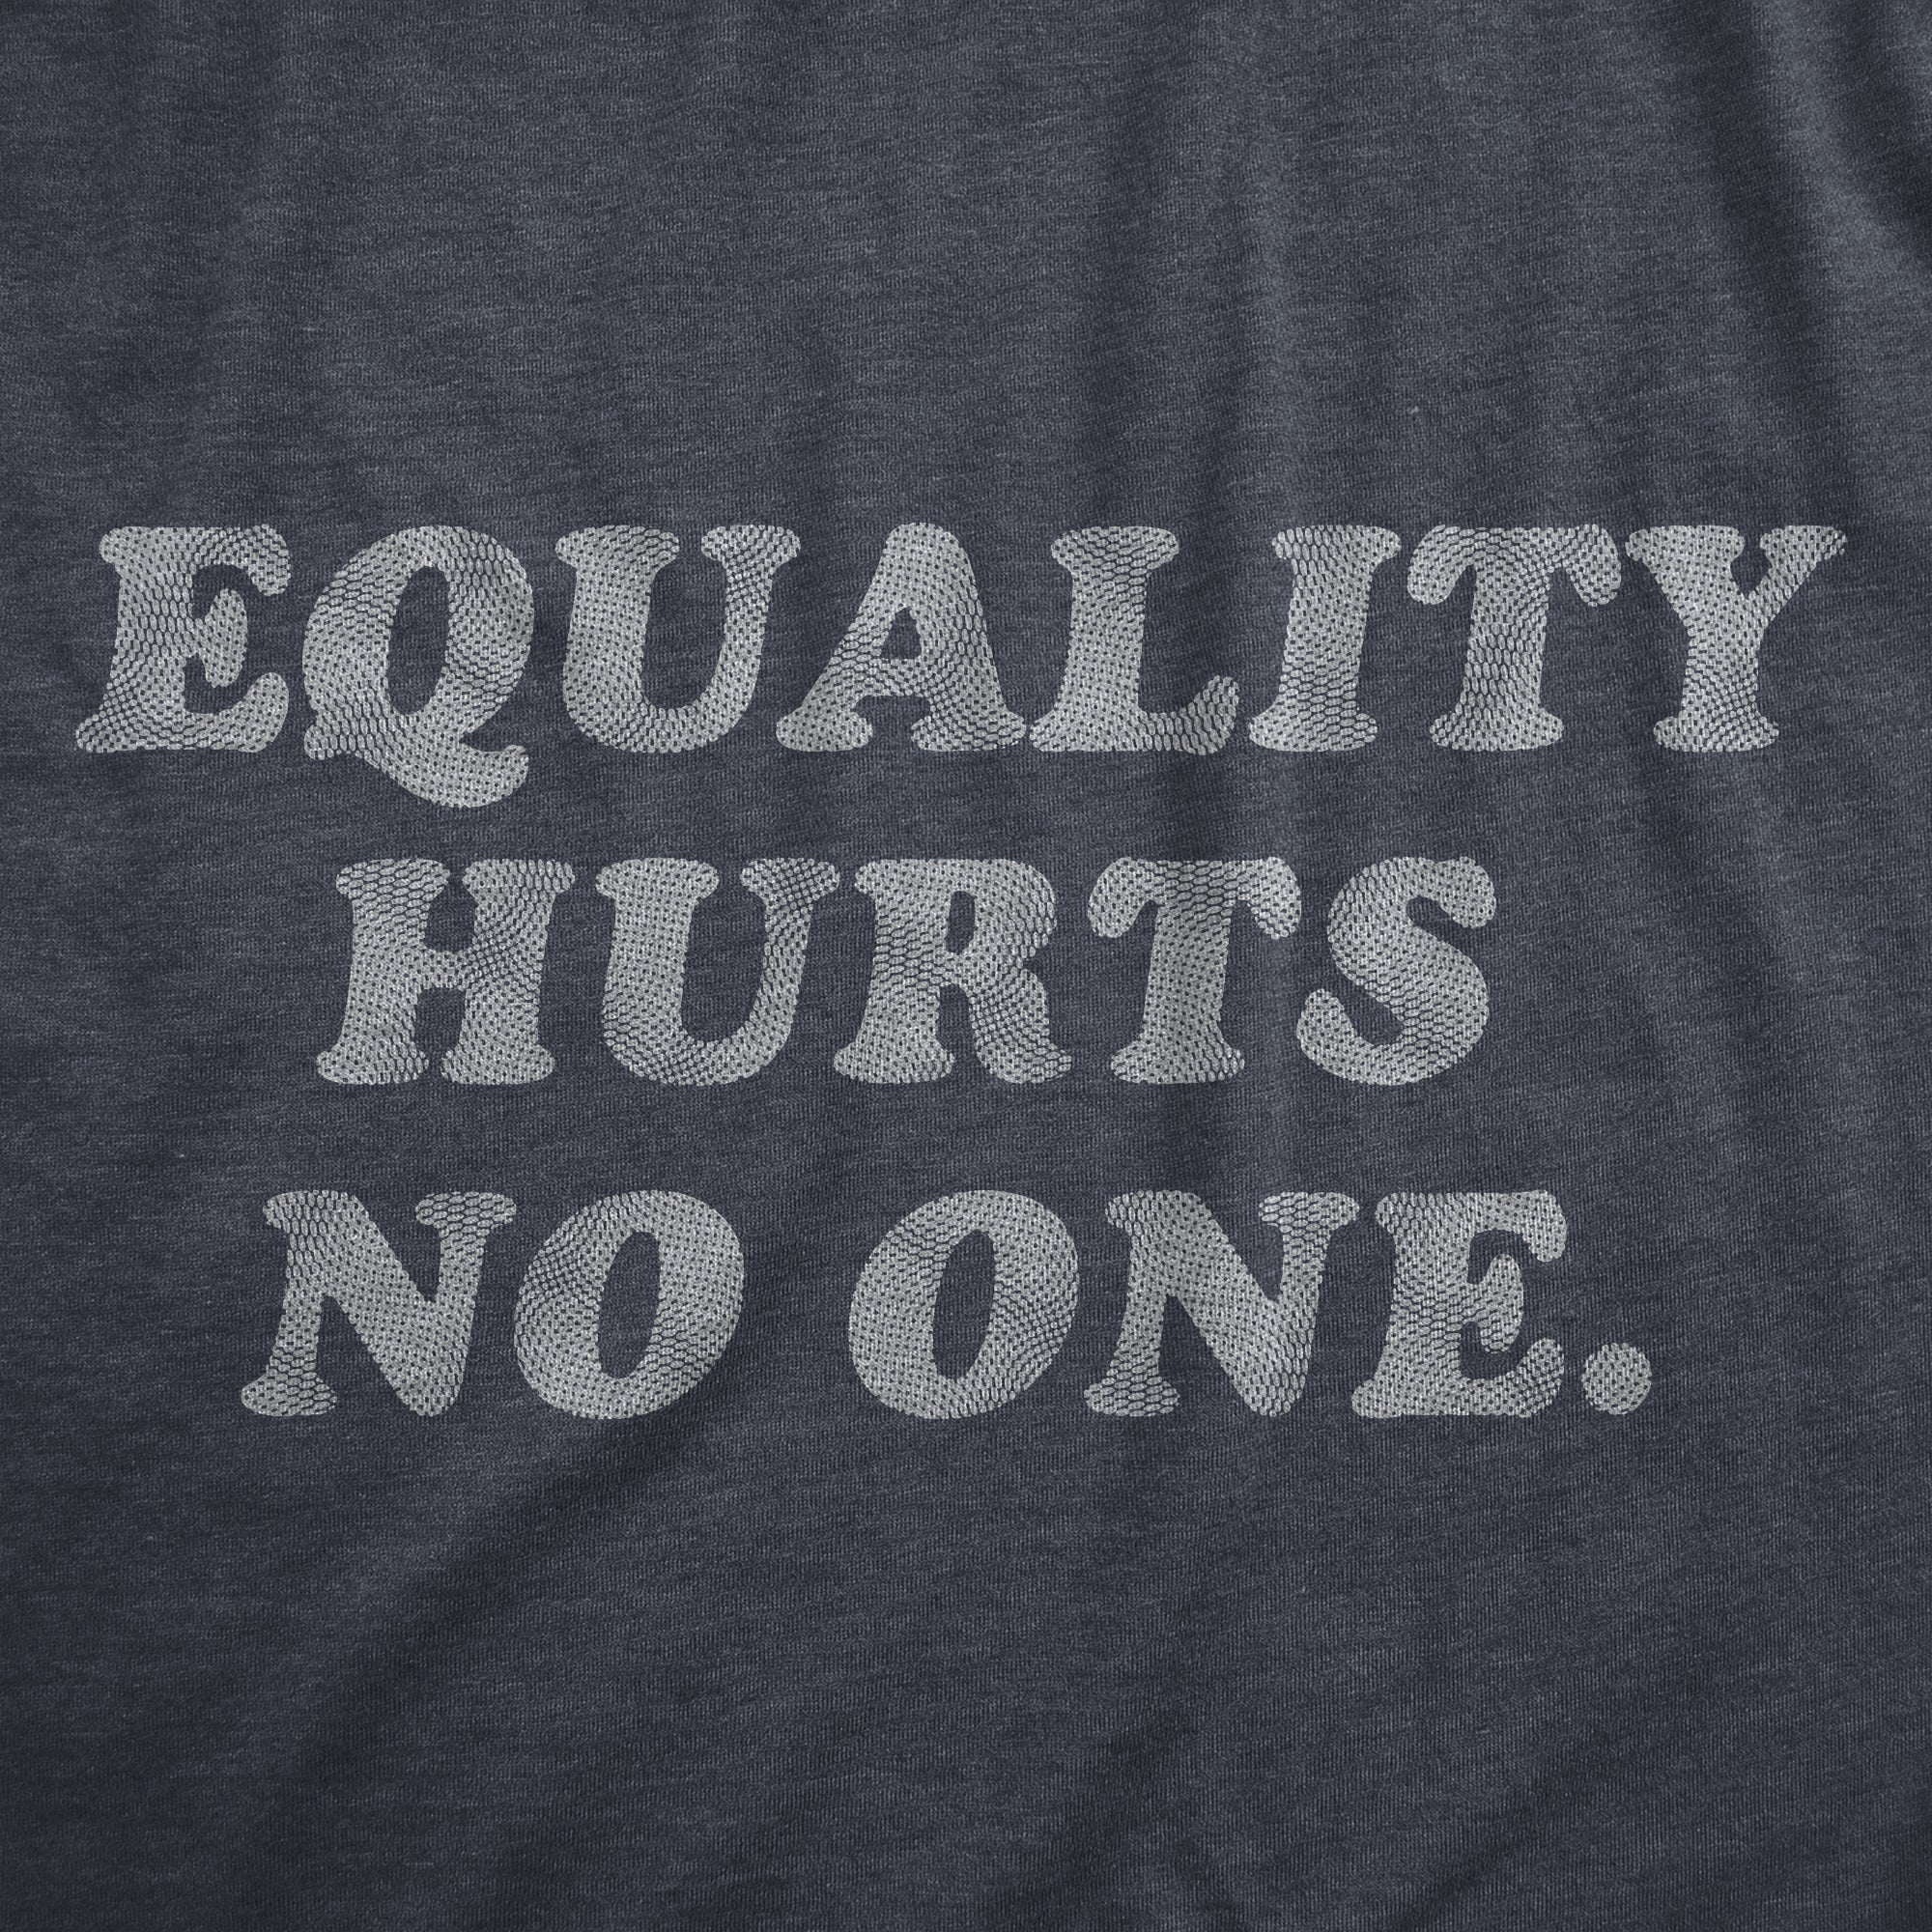 Funny Heather Navy - EQUALITY Equality Hurts No One Mens T Shirt Nerdy motivational Tee